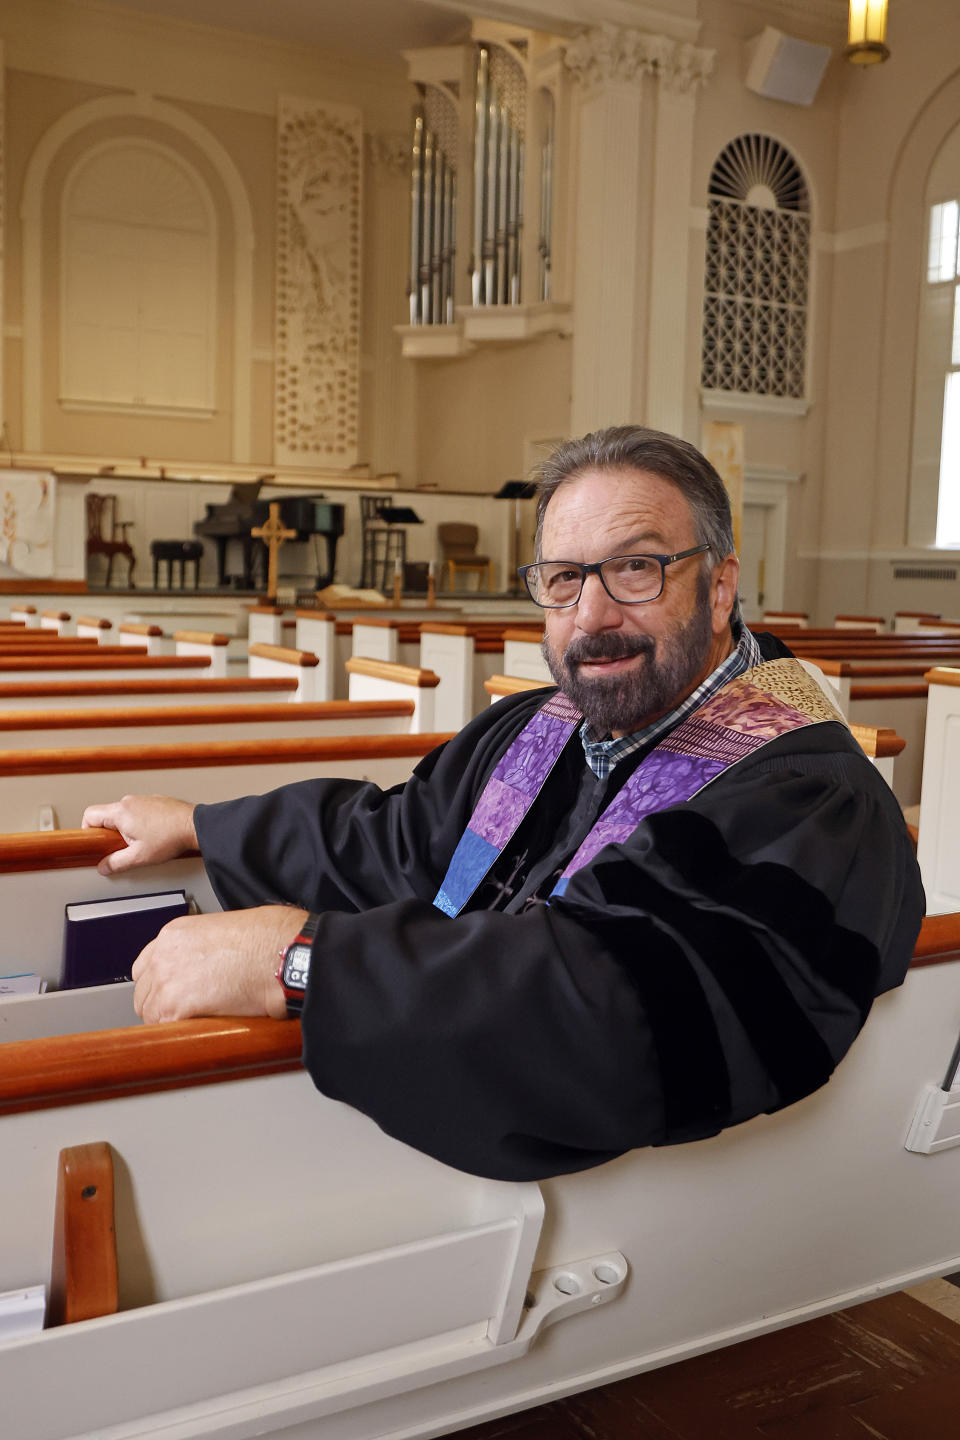 Pastor Mike Usey poses for a portrait sitting in the pews of College Park Baptist Church in Greensboro, N.C., Sunday, Sept. 25, 2022. (AP Photo/Karl DeBlaker)